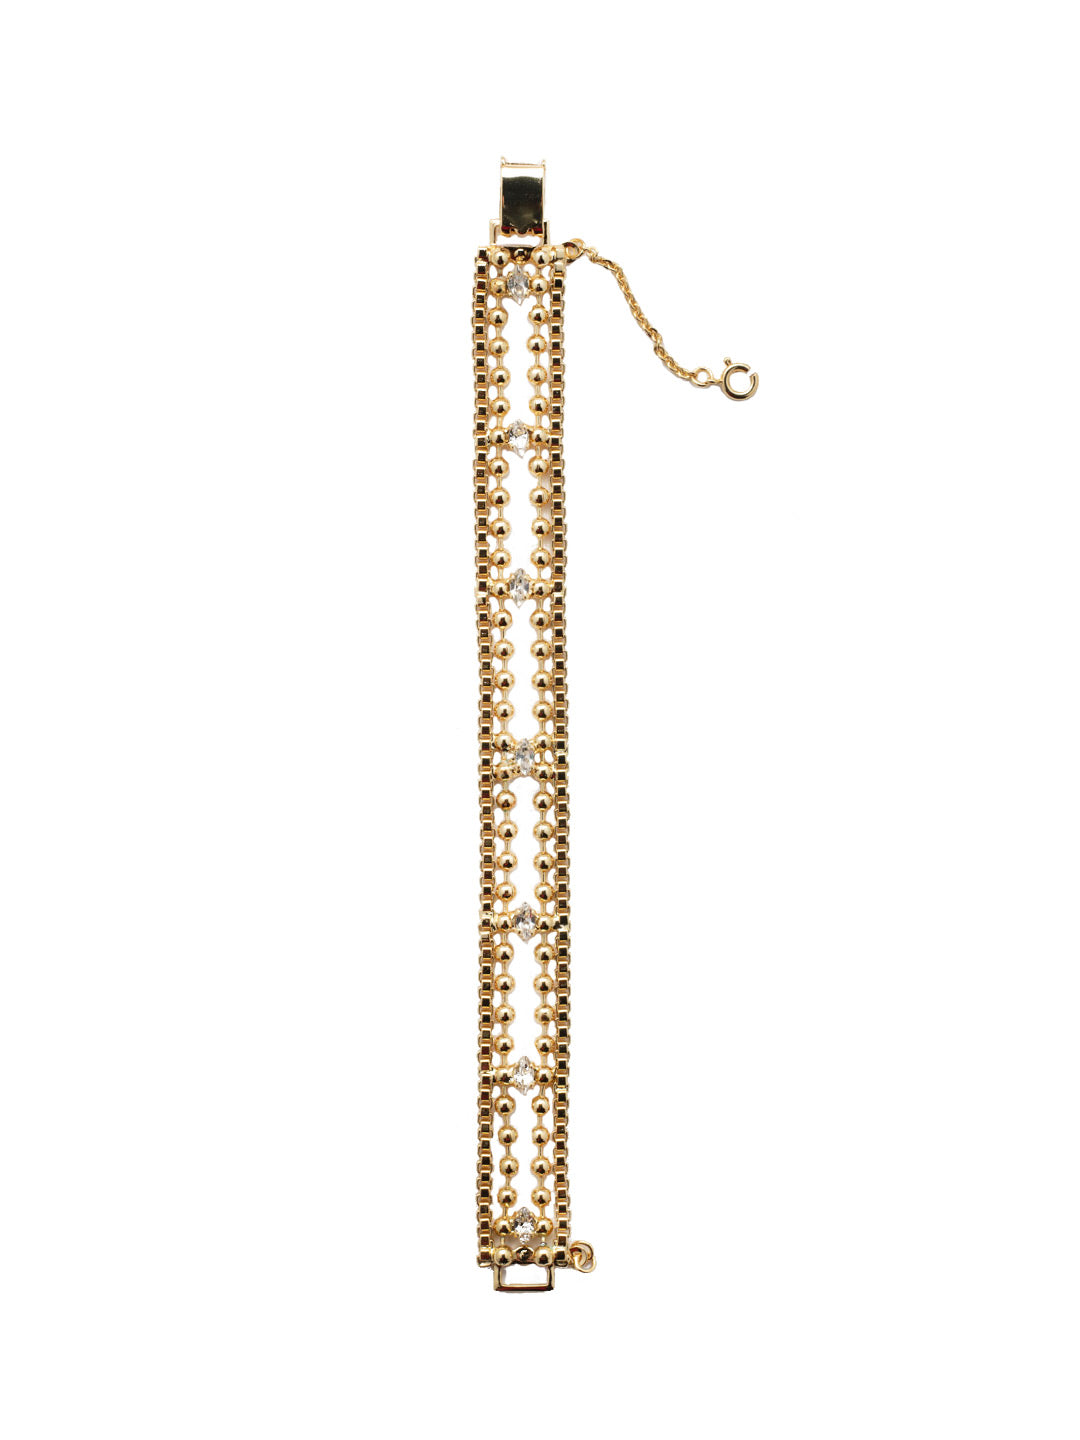 Cleo Bead Chain Tennis Bracelet - 4BEZ3BGCRY - <p>The Cleo Bead Chain Tennis Bracelet combines chains and sparkle to create a trendy wardrobe staple. Box chains and bead chains wrap around a studded line of navette cut crystals. From Sorrelli's Crystal collection in our Bright Gold-tone finish.</p>